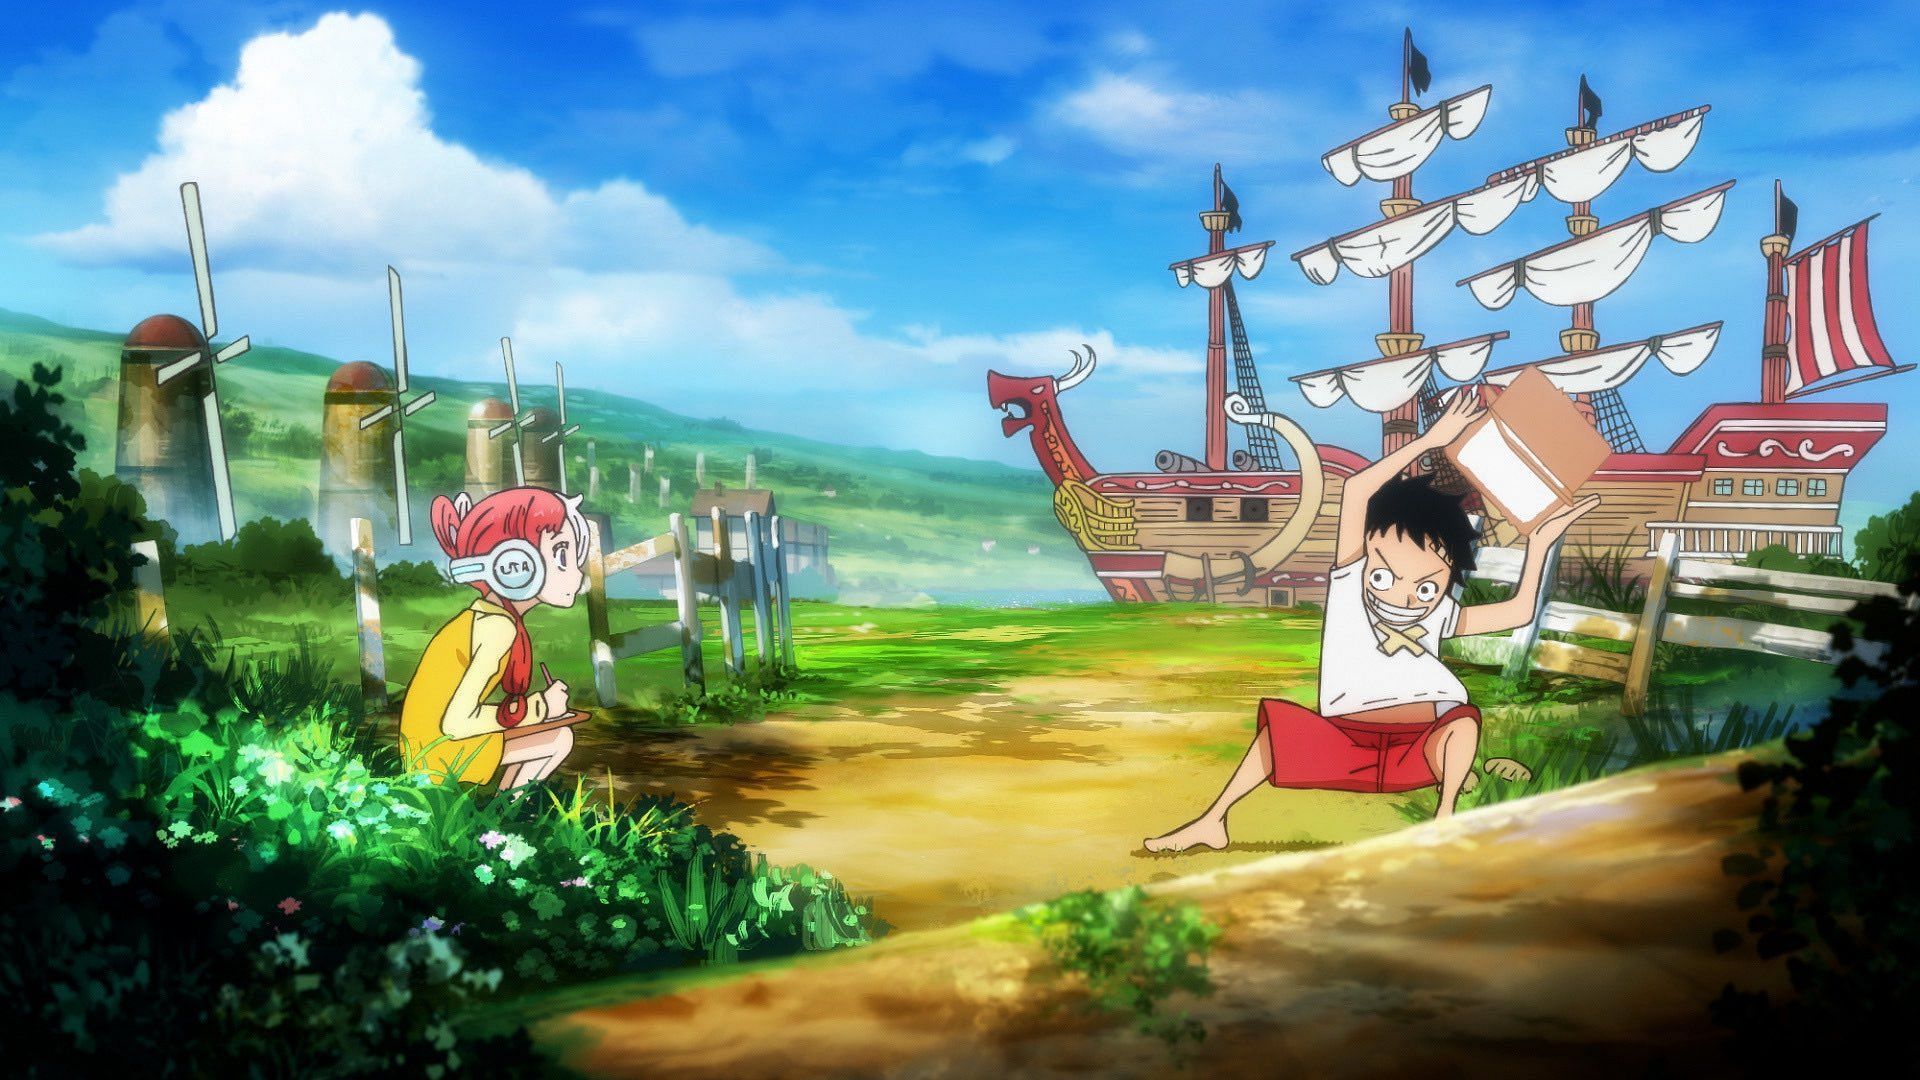 Luffy and Uta will be the central focus of One Piece Episode 1029 (Image via Toei Animation)